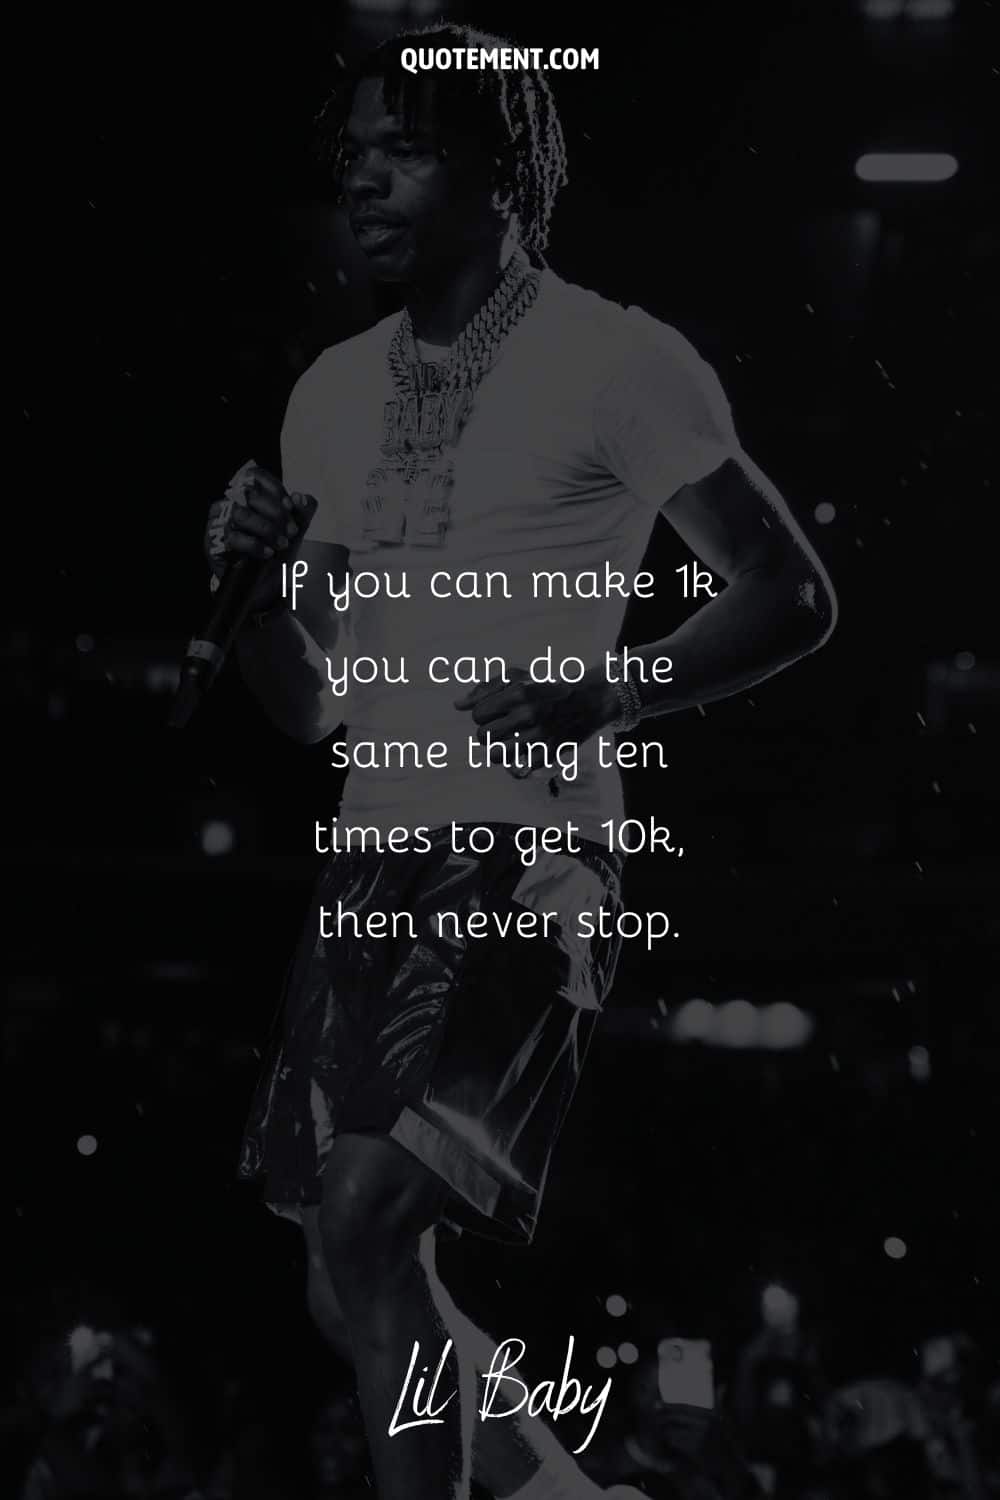 rapper image representing lil baby quote about money